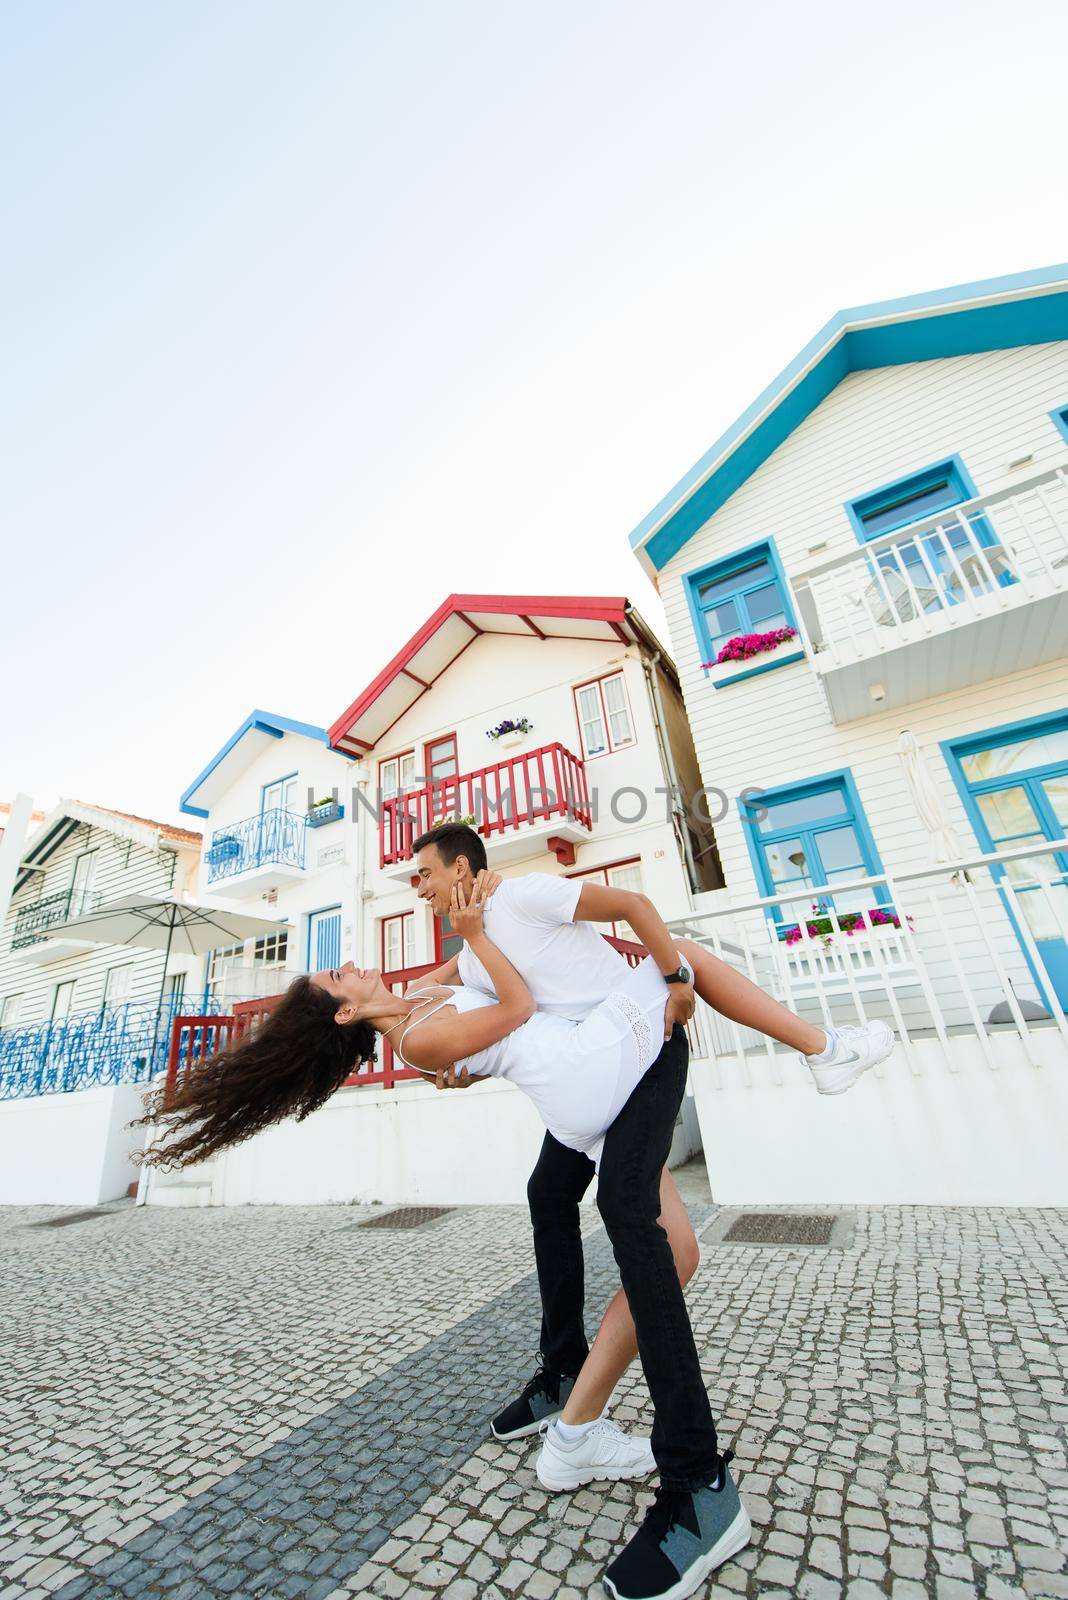 Young couple have fun and smiles and looks each others in Aveiro, Portugal near colourful and peaceful houses. Lifestyle. Having fun, laughs, smiles. by Rabizo